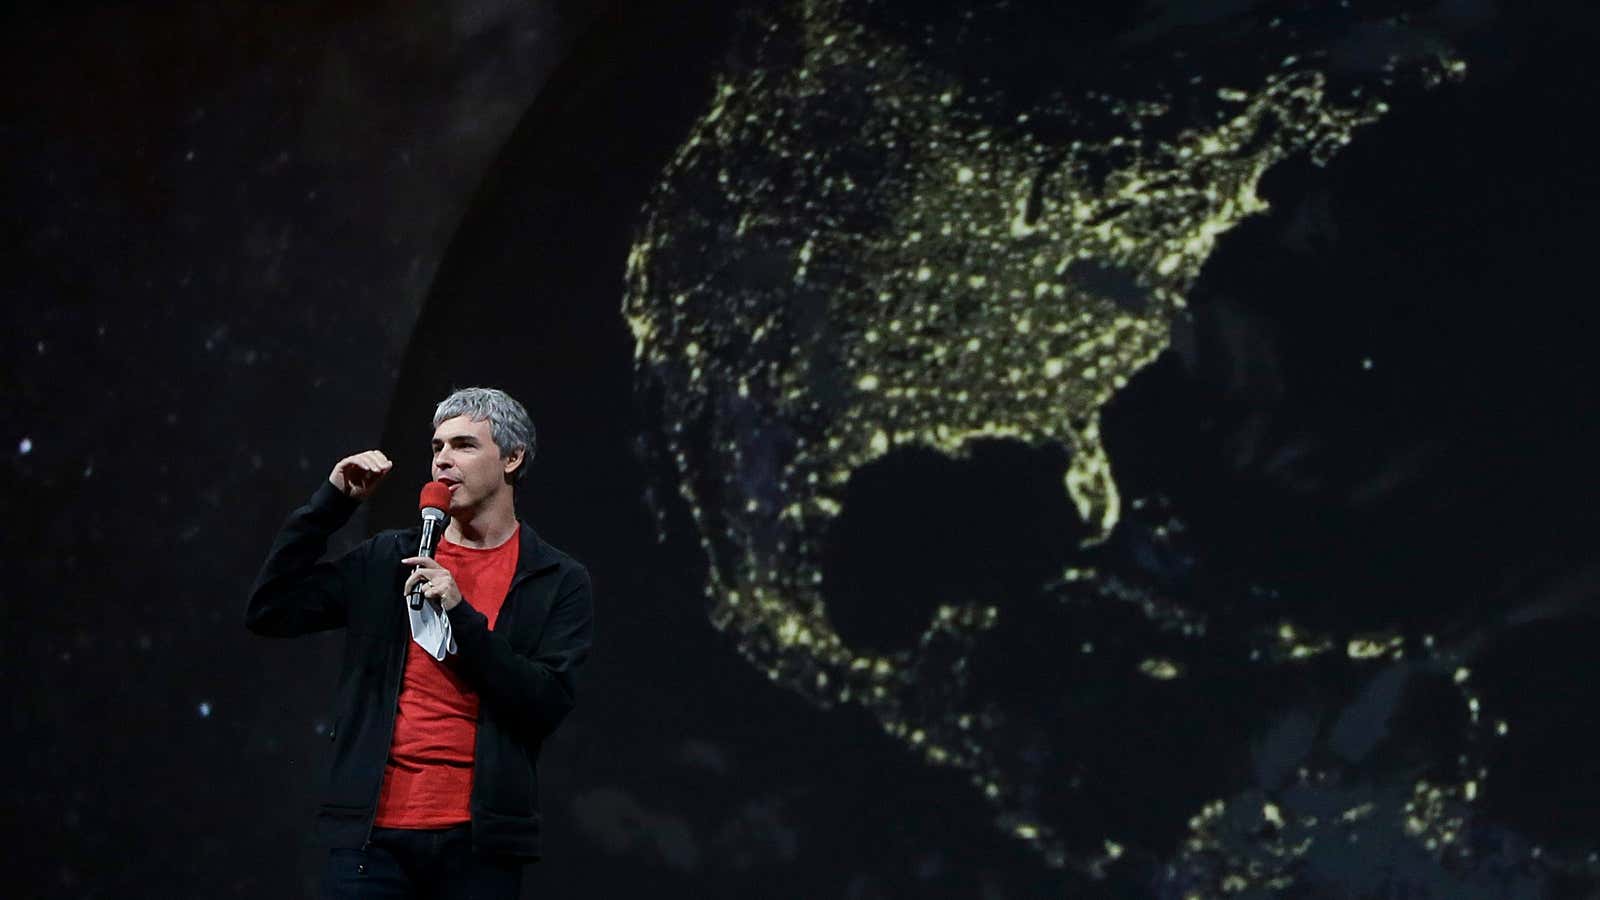 “[W]e have not joined any program that would give the U.S. government—or any other government—direct access to our servers,” says Google CEO Larry Page.